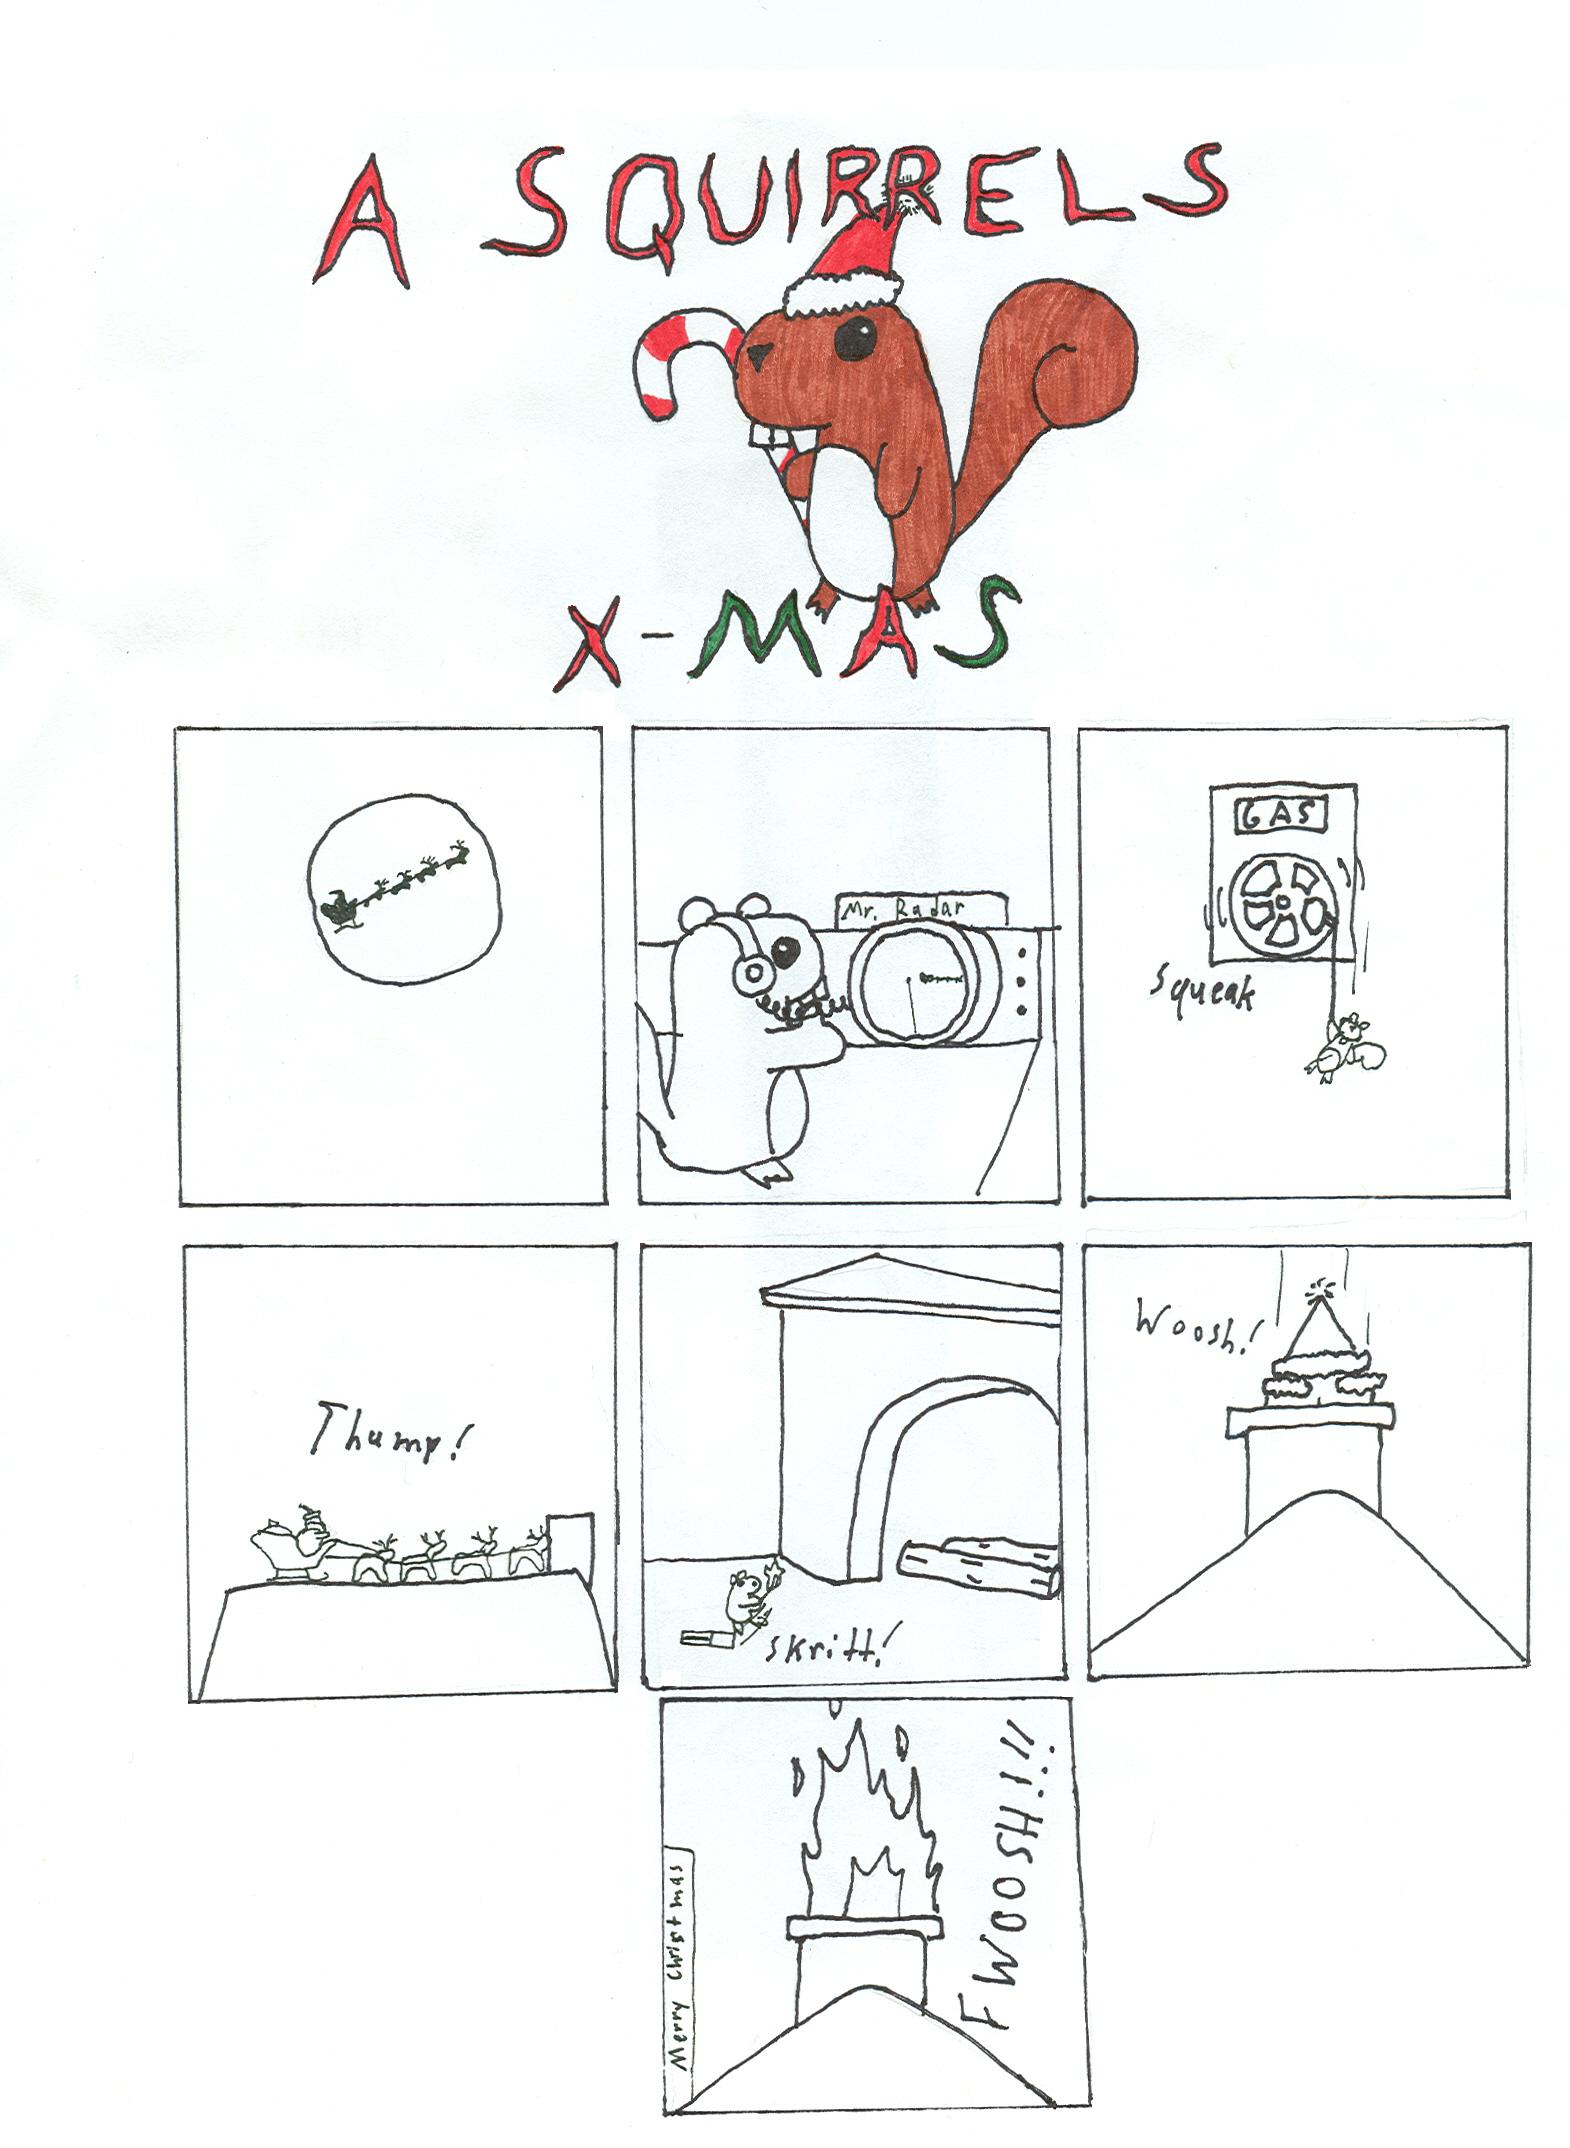 The Squirrels Christmas